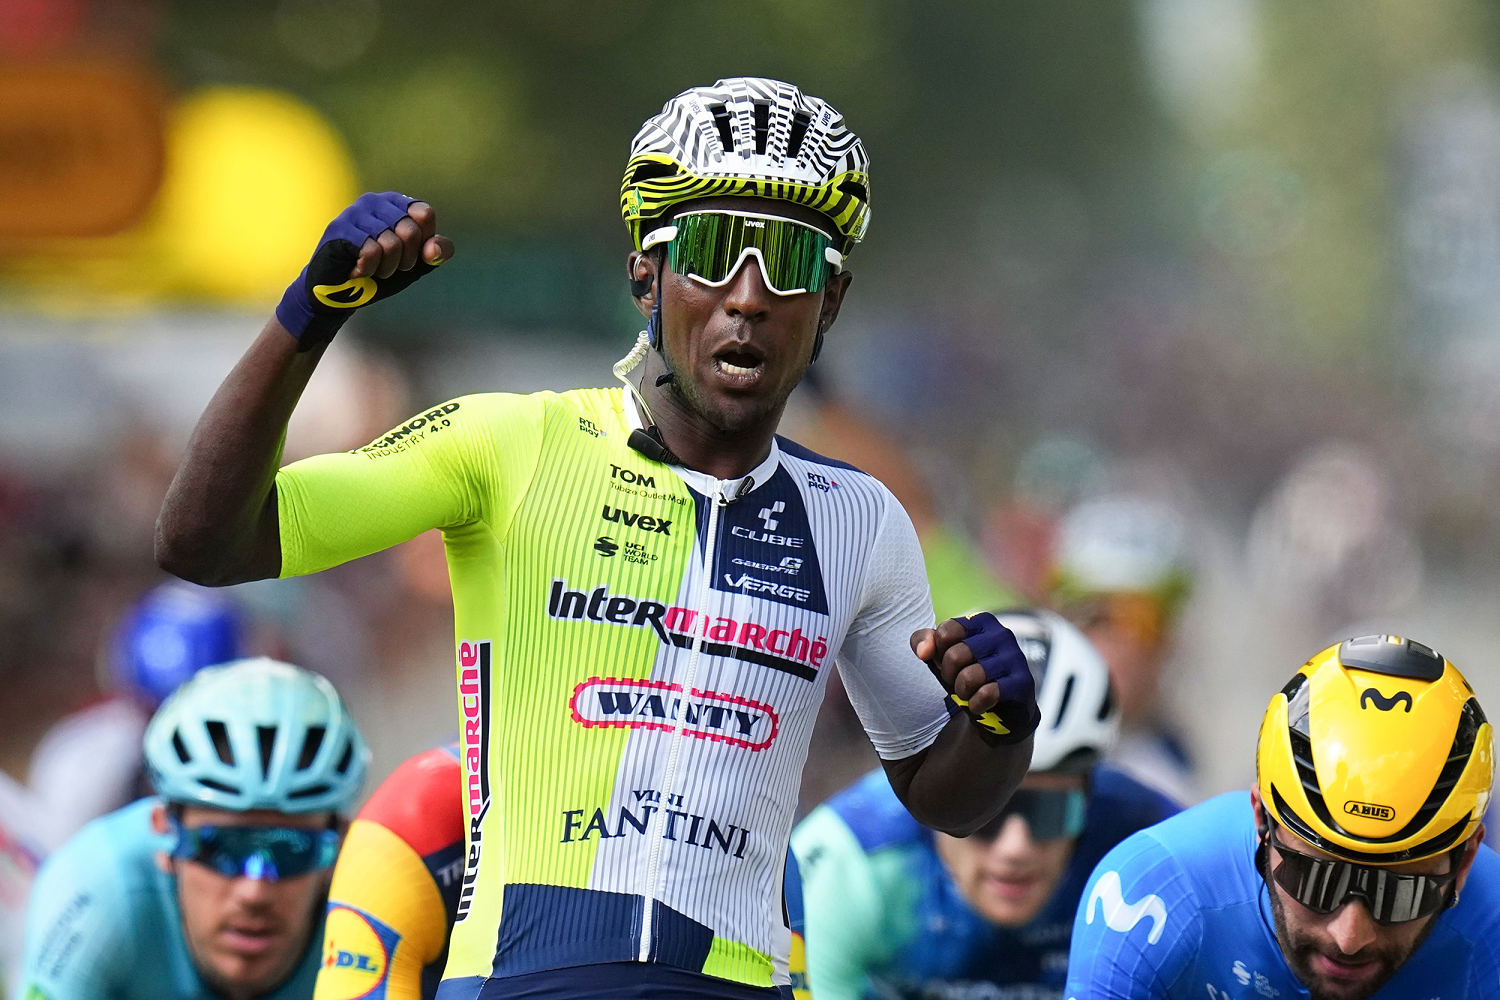 Eritrea's Biniam Girmay becomes the first Black African rider to win a Tour de France stage